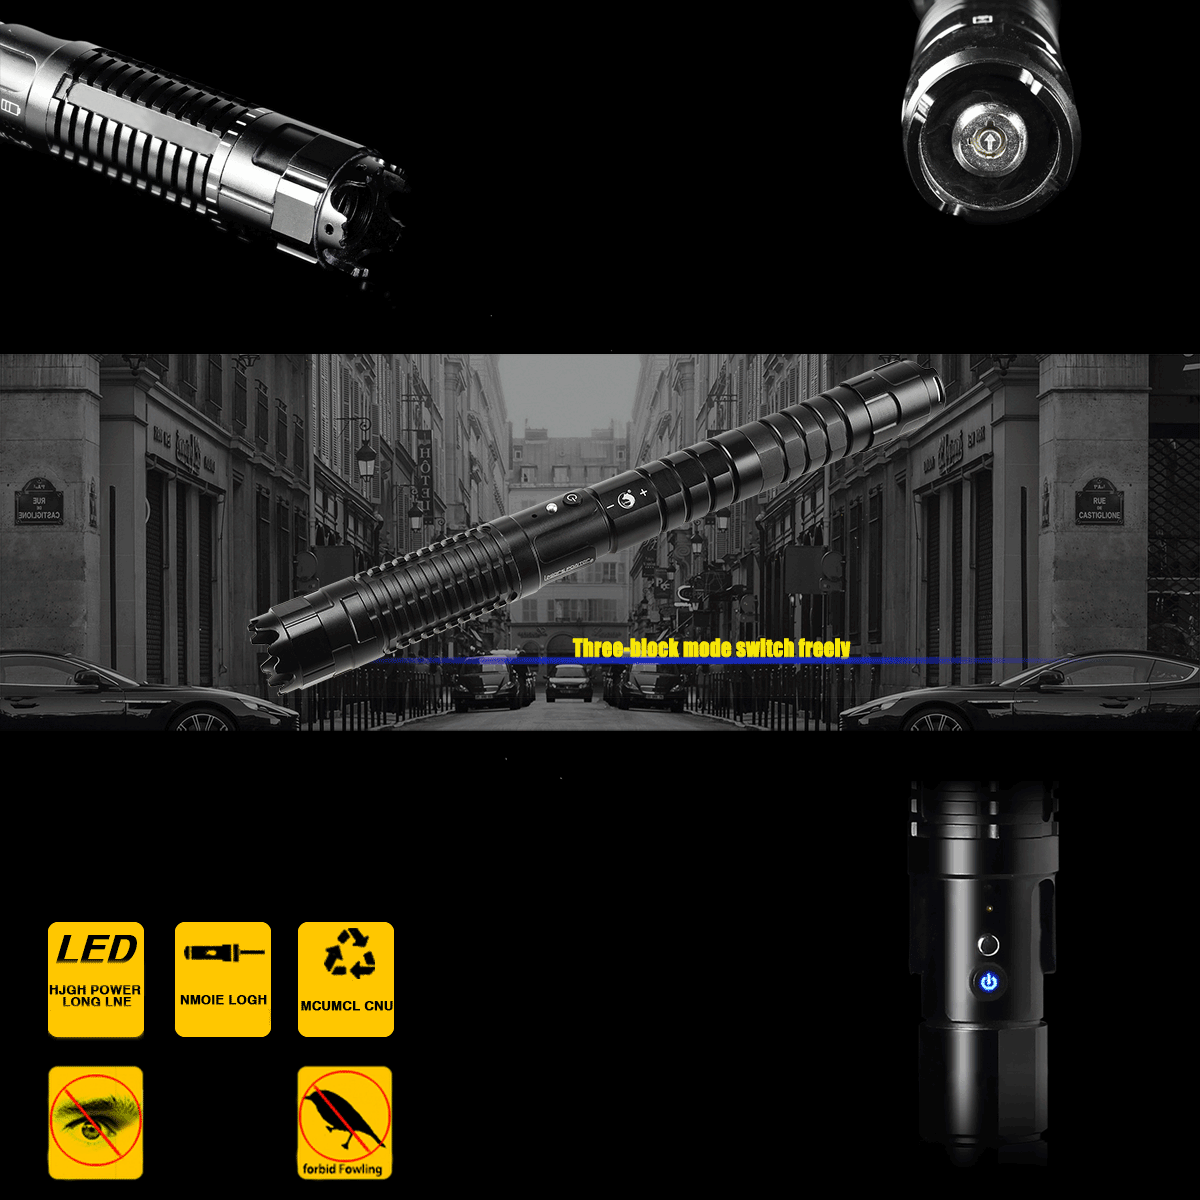 UKing ZQ-j8 10000mW 445nm Blue Beam 3-Mode Zoomable 5-in-1 Laserpointer-Set Schwarz